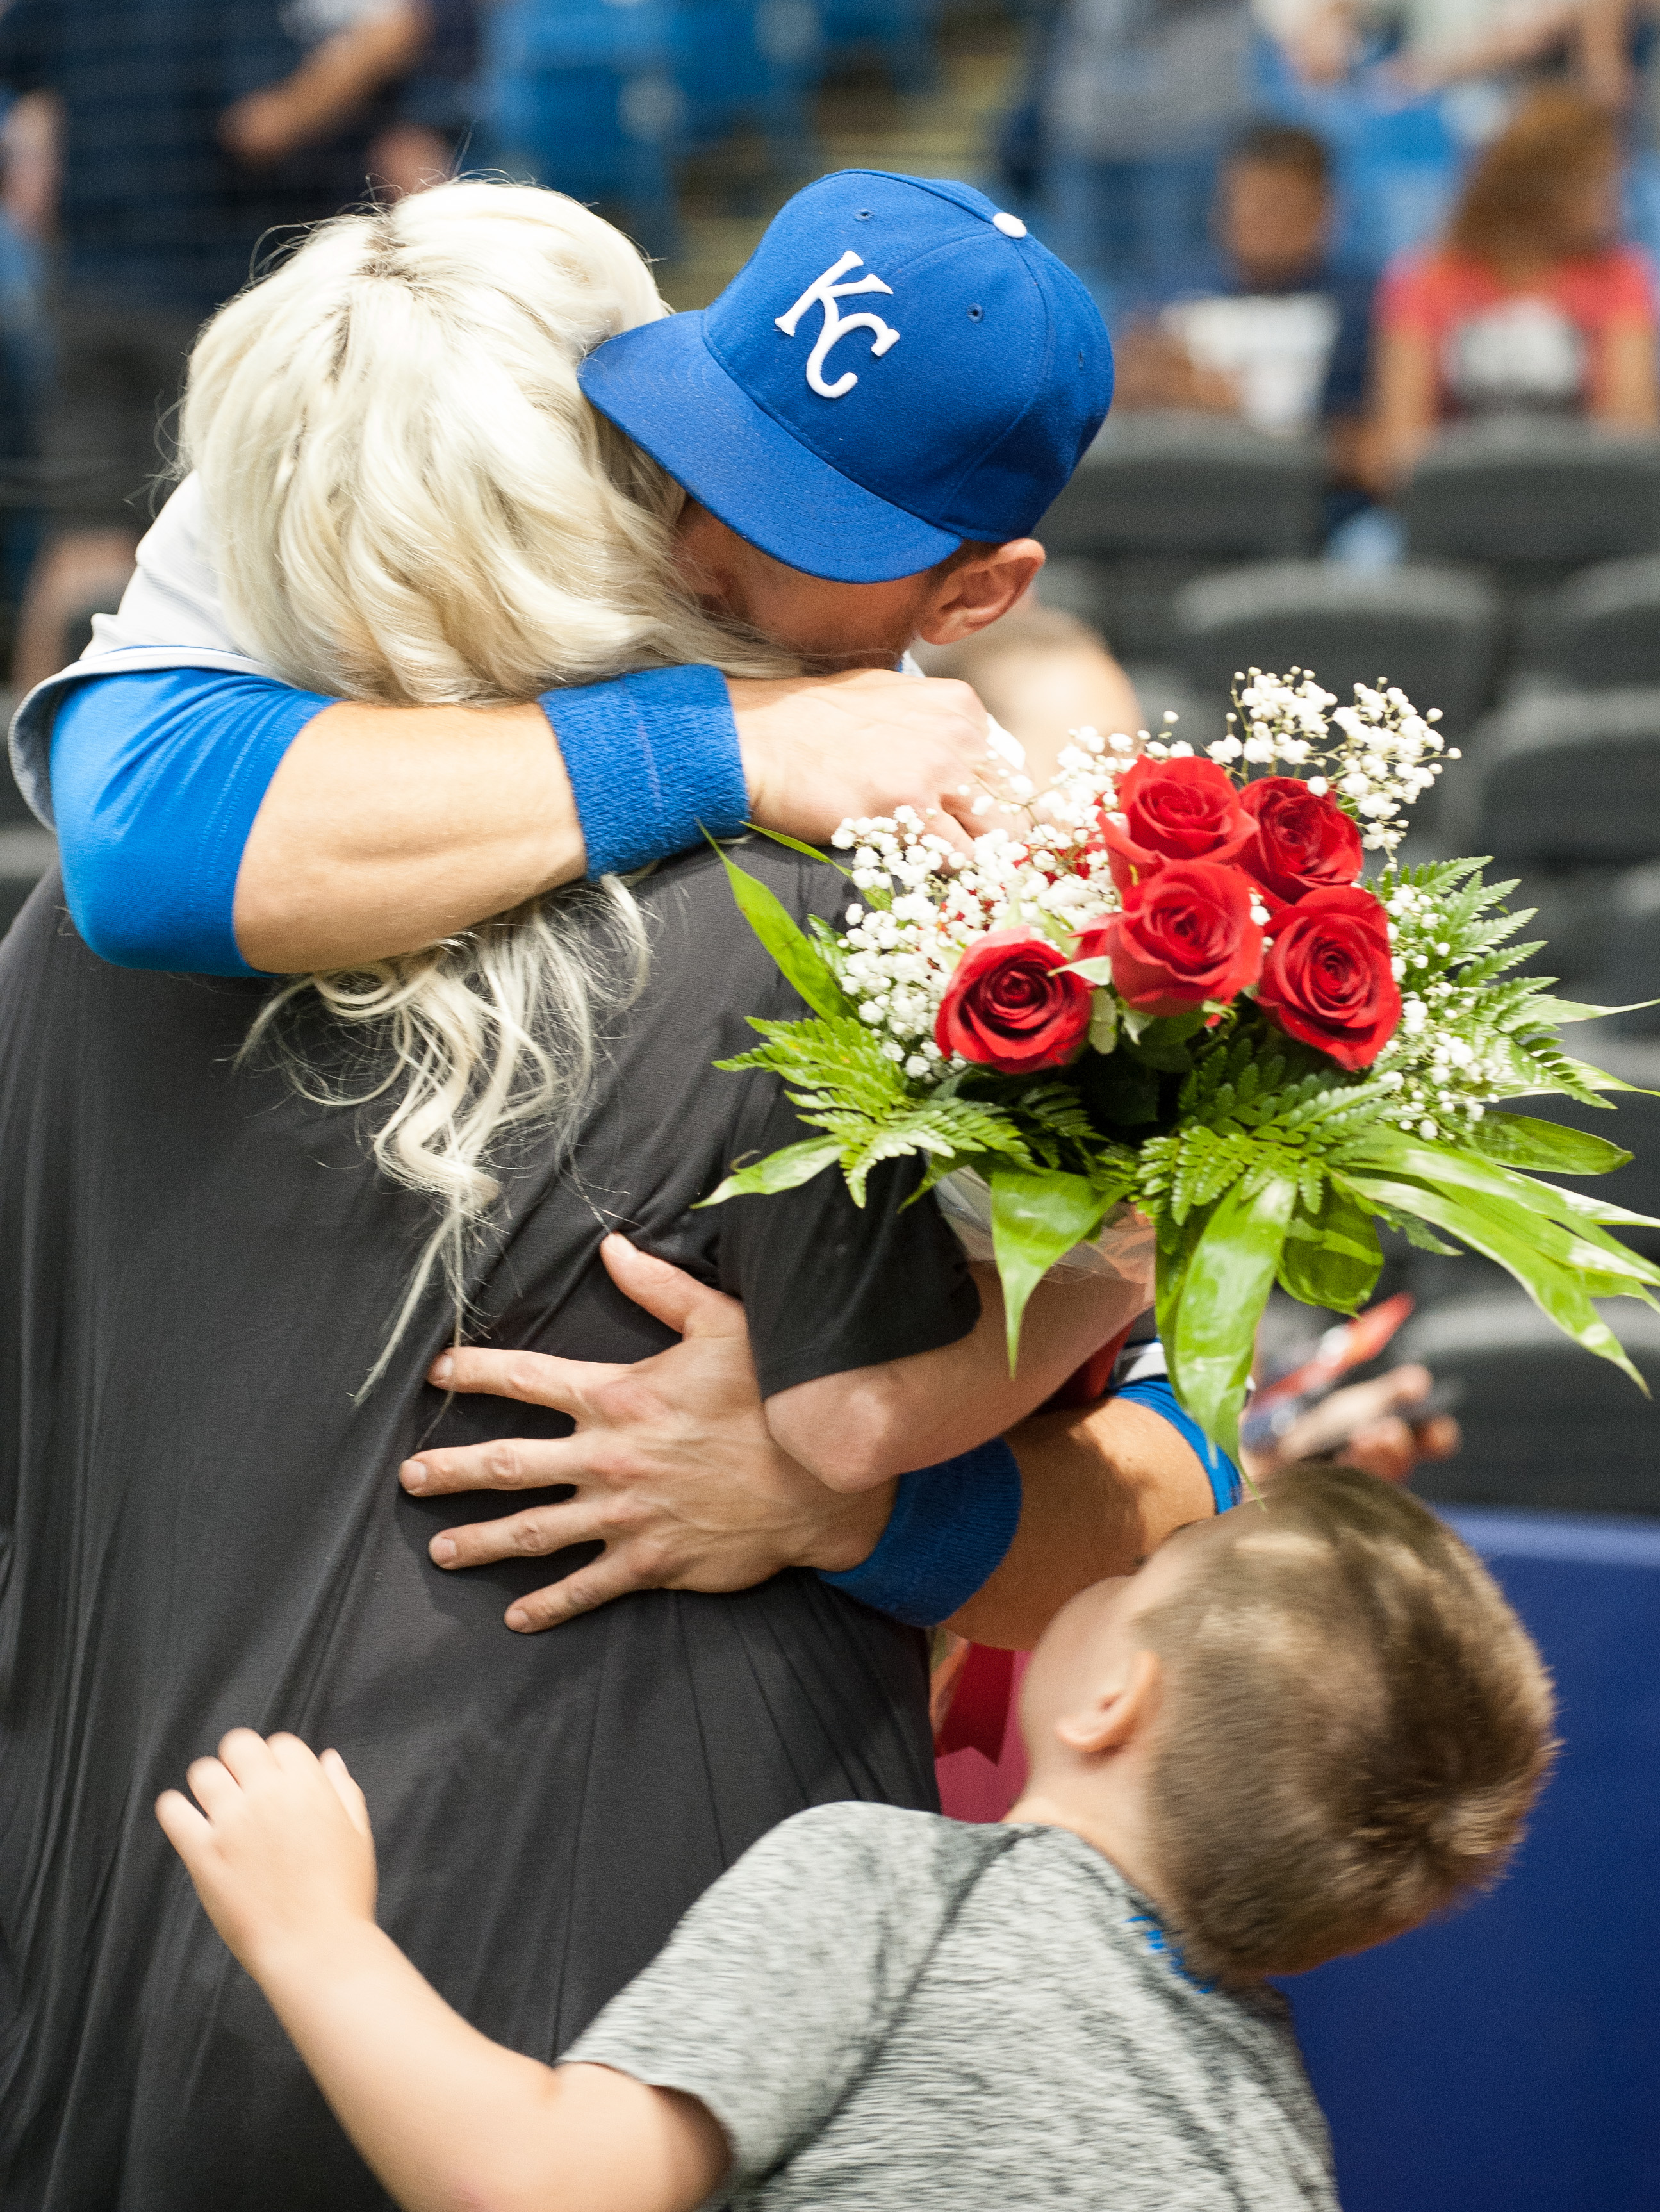 Julianna Zobrist tells Ben to stay with Royals if she has baby during World  Series